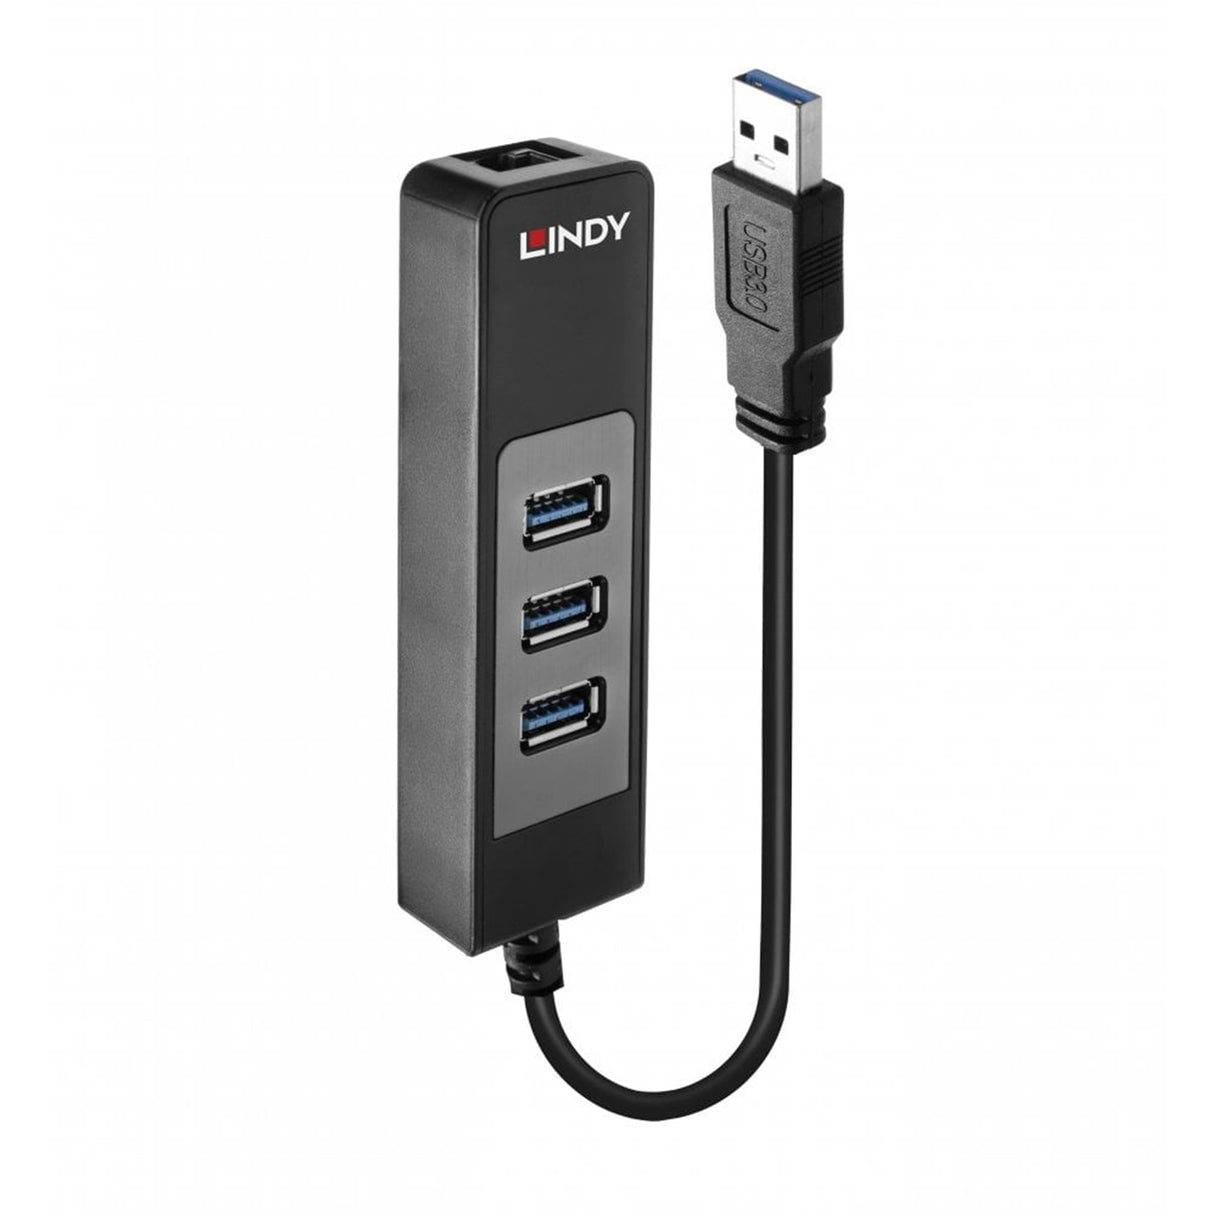 LINDY 43176 USB 3.0 Hub & Gigabit Ethernet Converter, Supports 10/100/1000BASE-T, 3 x USB 3.1 Gen 1 / 3.0 SuperSpeed Ports Supporting Data Transfer Rates up to 5Gbps, Bus-Powered with No External Power Supply Required, Retail Polybag Packaging